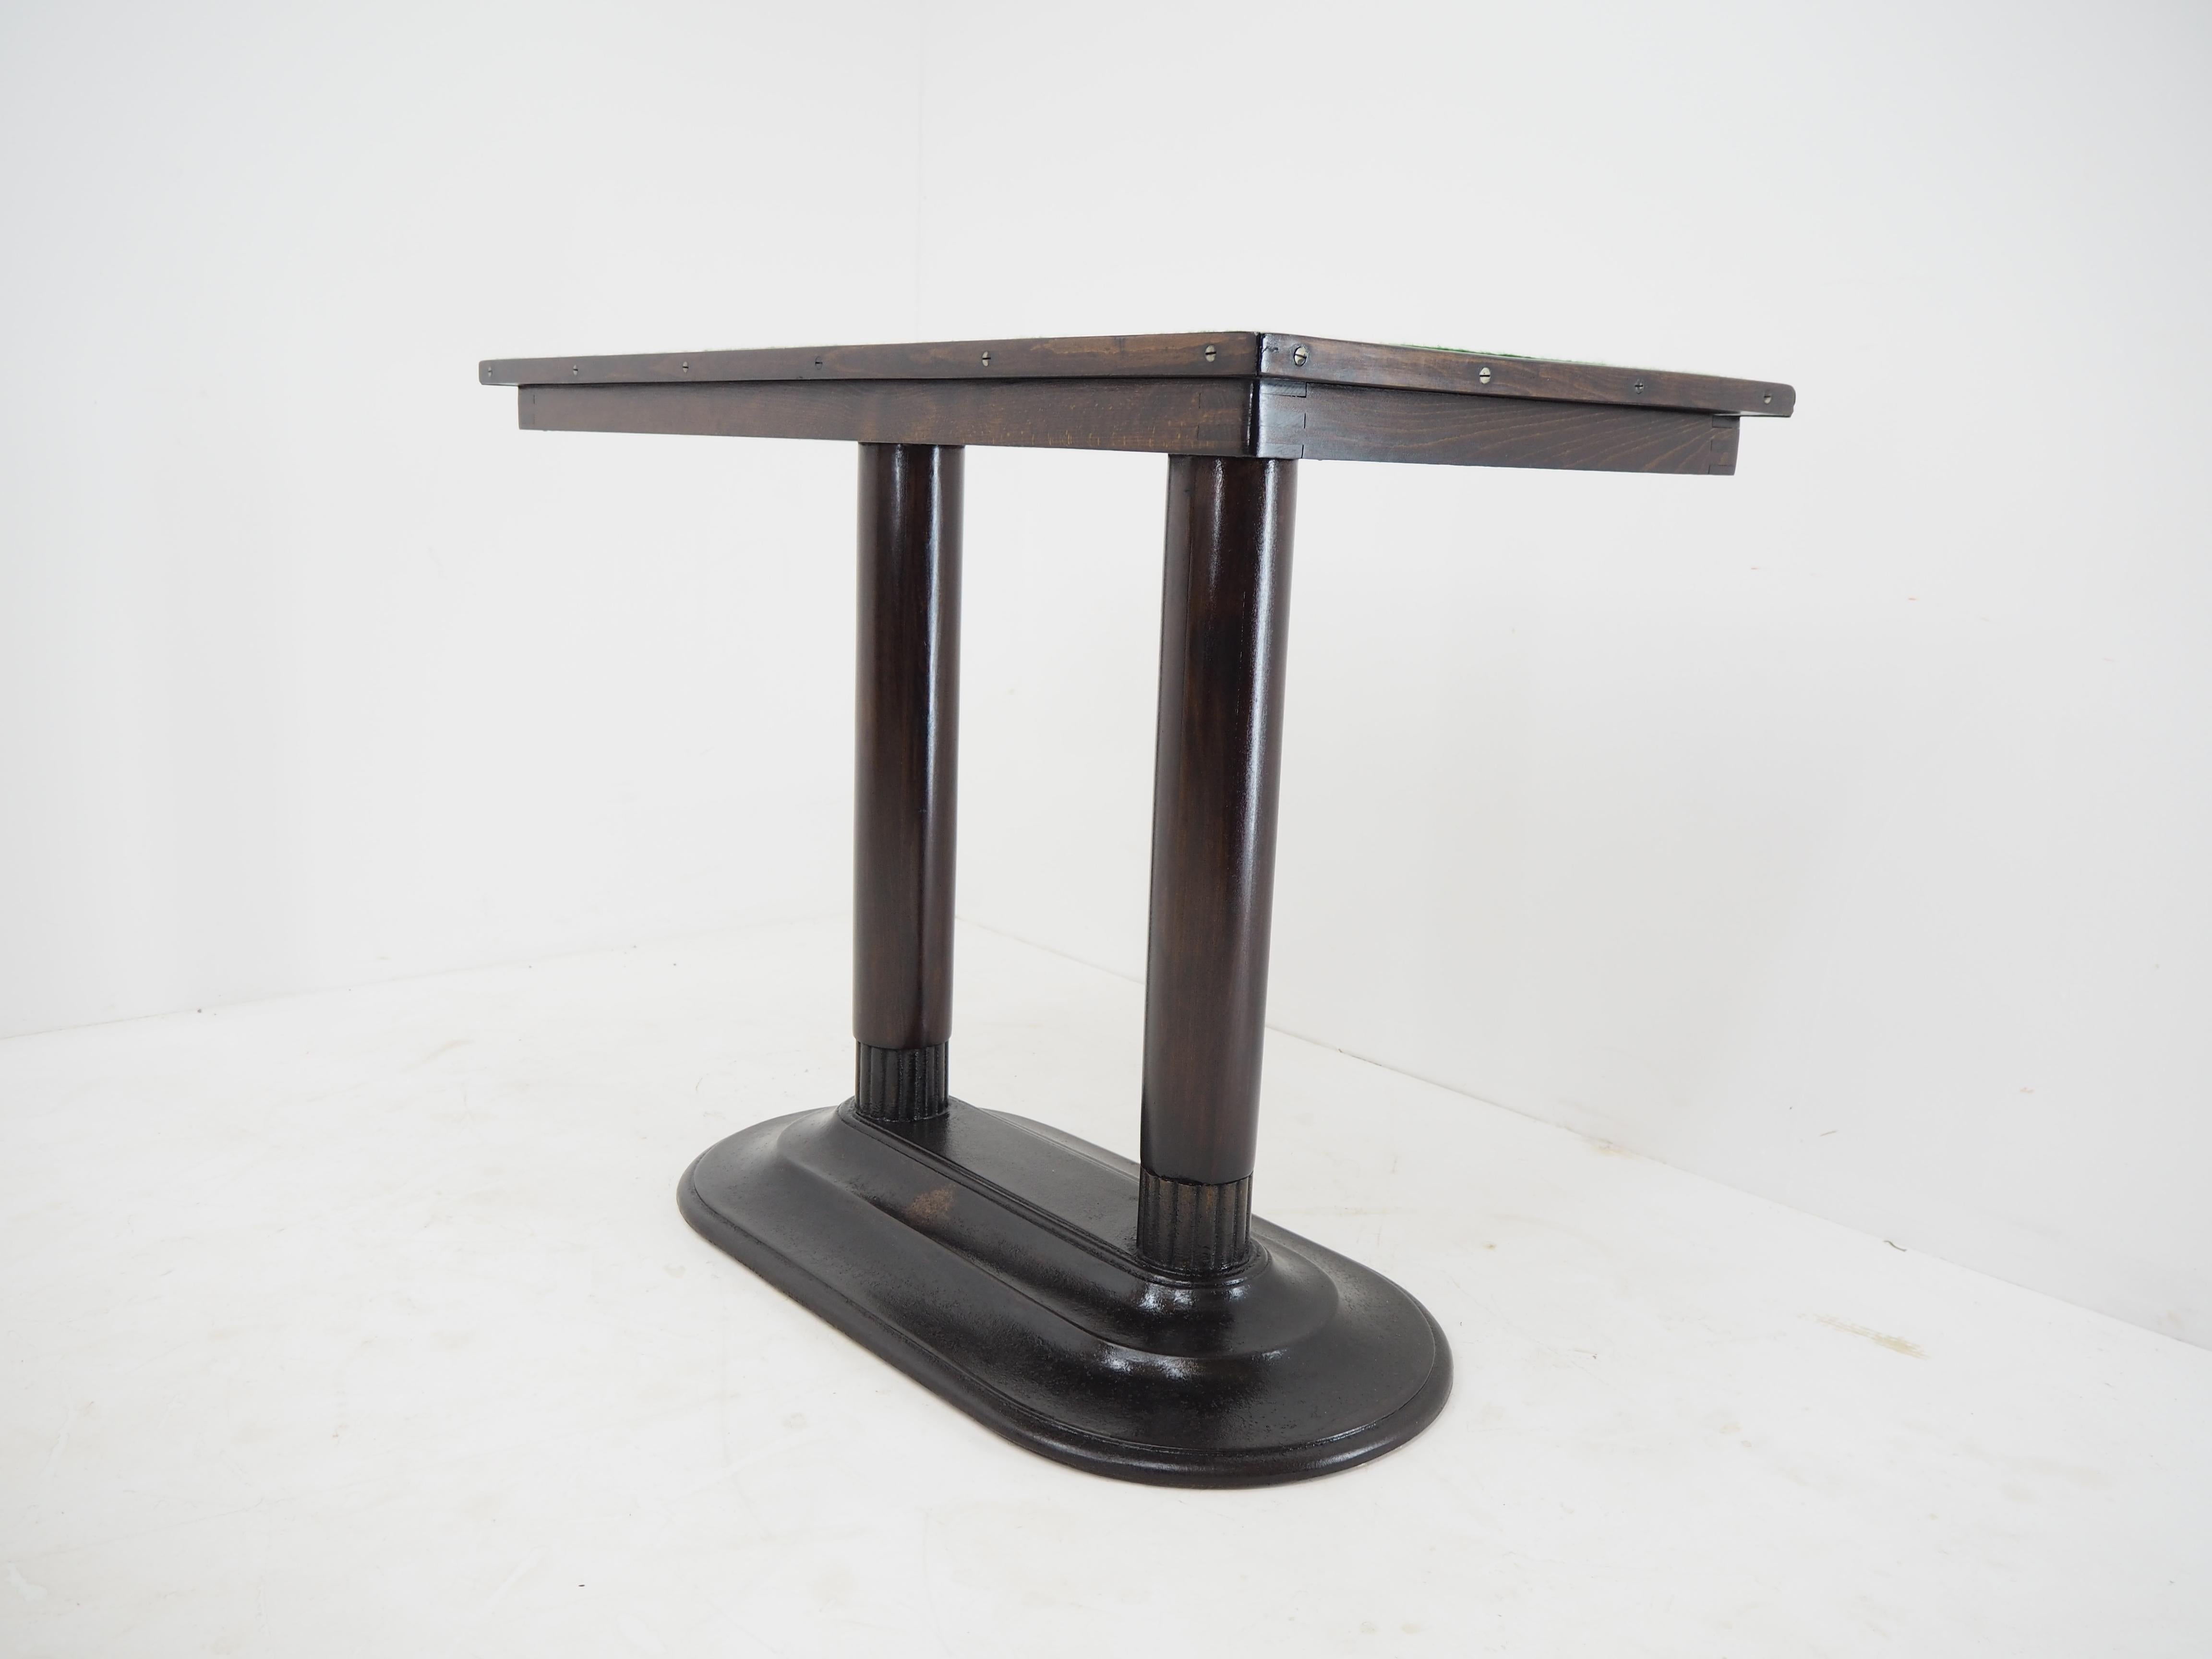 European Antique Art Deco Game Table with Iron Base, 1920s For Sale